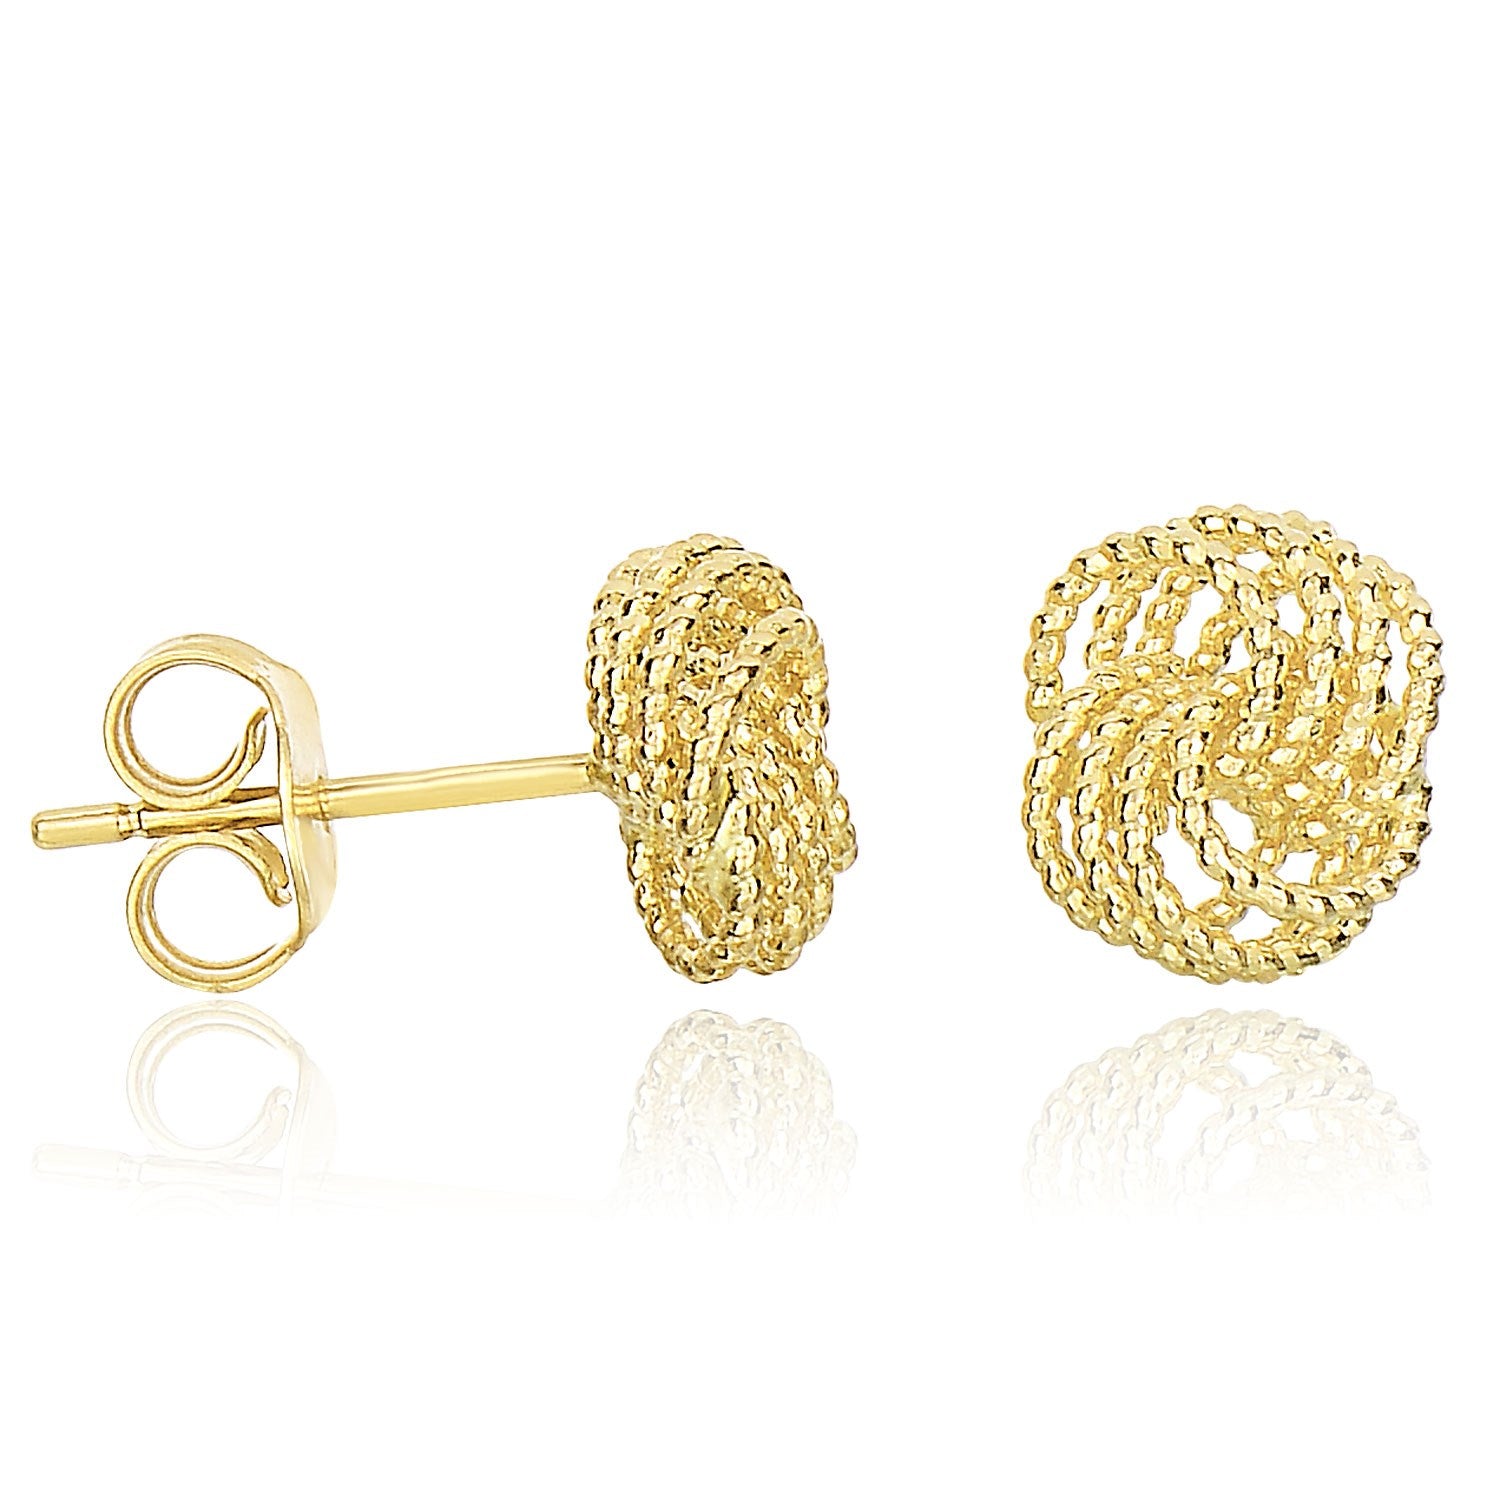 14K Yellow Gold Textured Finish Love Knot Style Earrings 63467-1